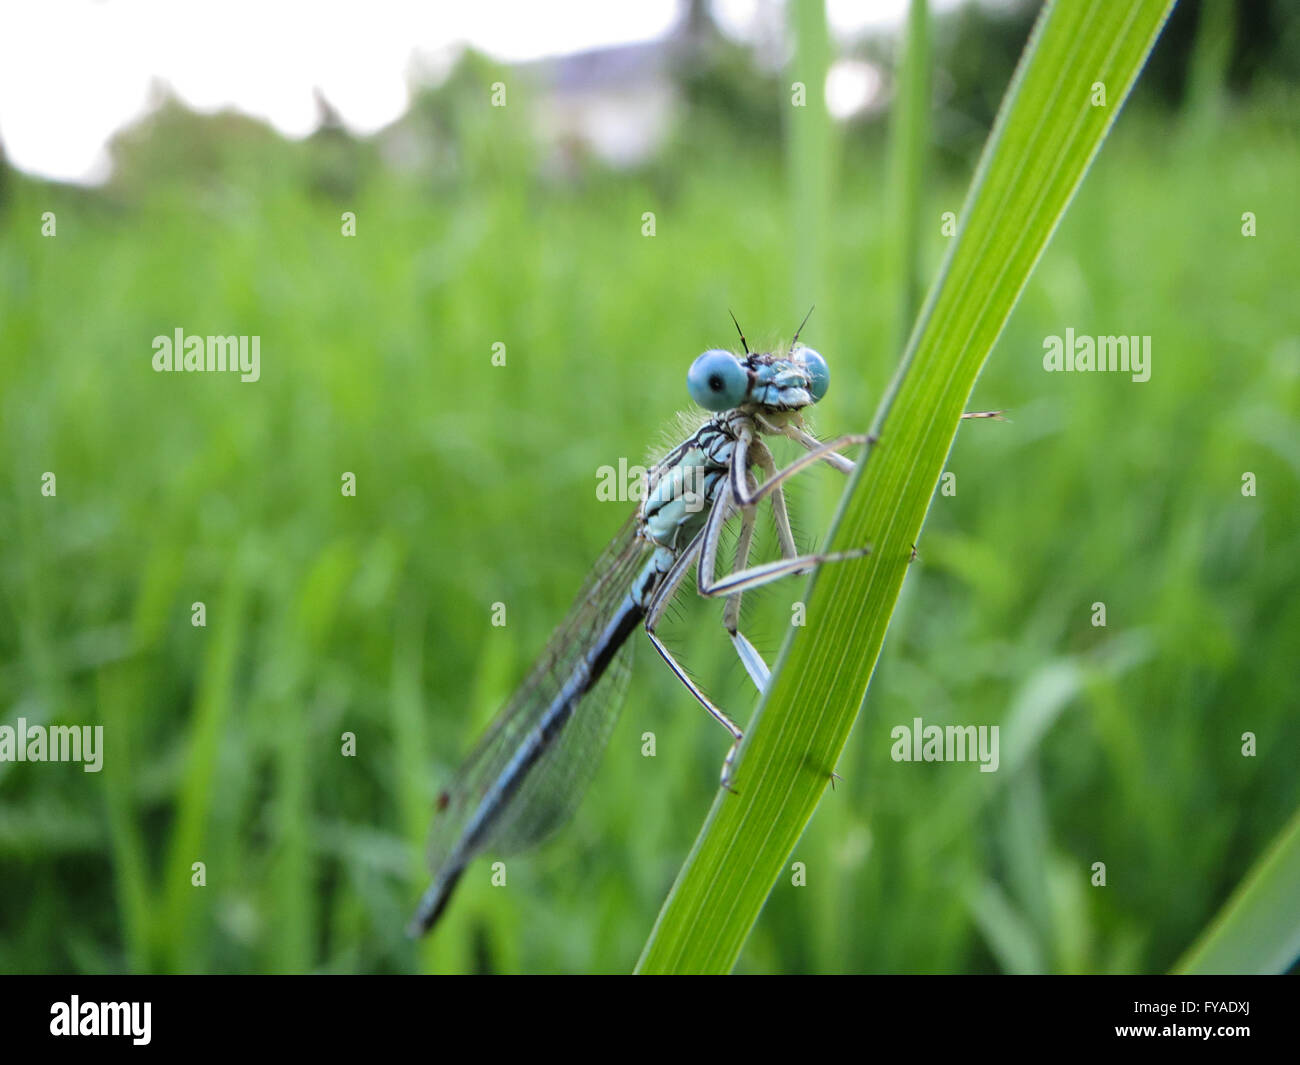 Dragon fly watch the photographer Stock Photo